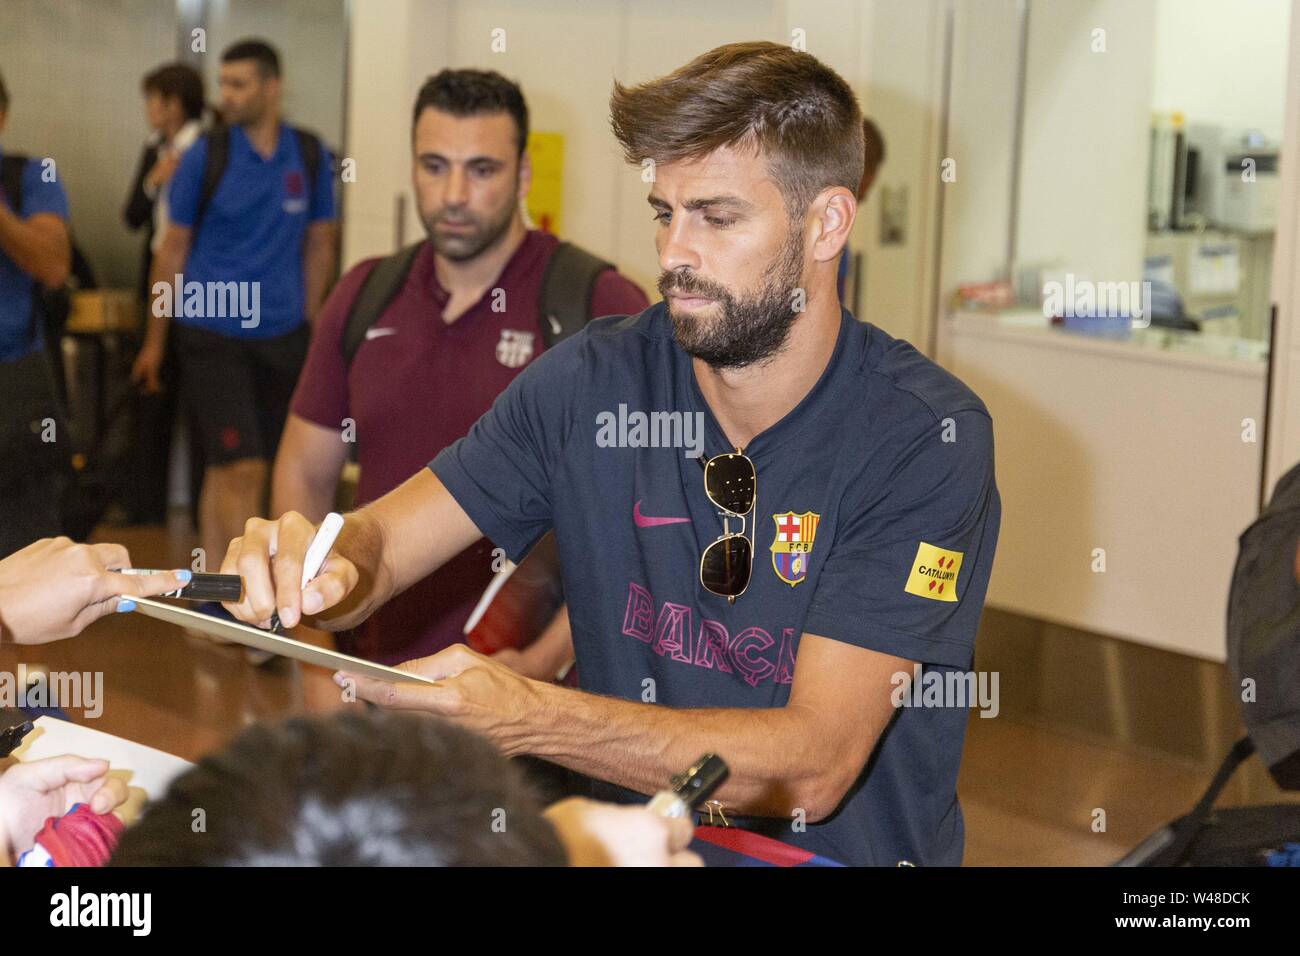 Tokyo, Japan. 21st July, 2019. FC Barcelona player Gerard Pique Bernabeu signs autographs for fans upon his arrival at Tokyo International Airport. FC Barcelona team came to Japan to play in the Rakuten Cup. Many Japanese fans waited with cameras, shirts and autograph boards to welcome the team at the airport. Credit: Rodrigo Reyes Marin/ZUMA Wire/Alamy Live News Stock Photo